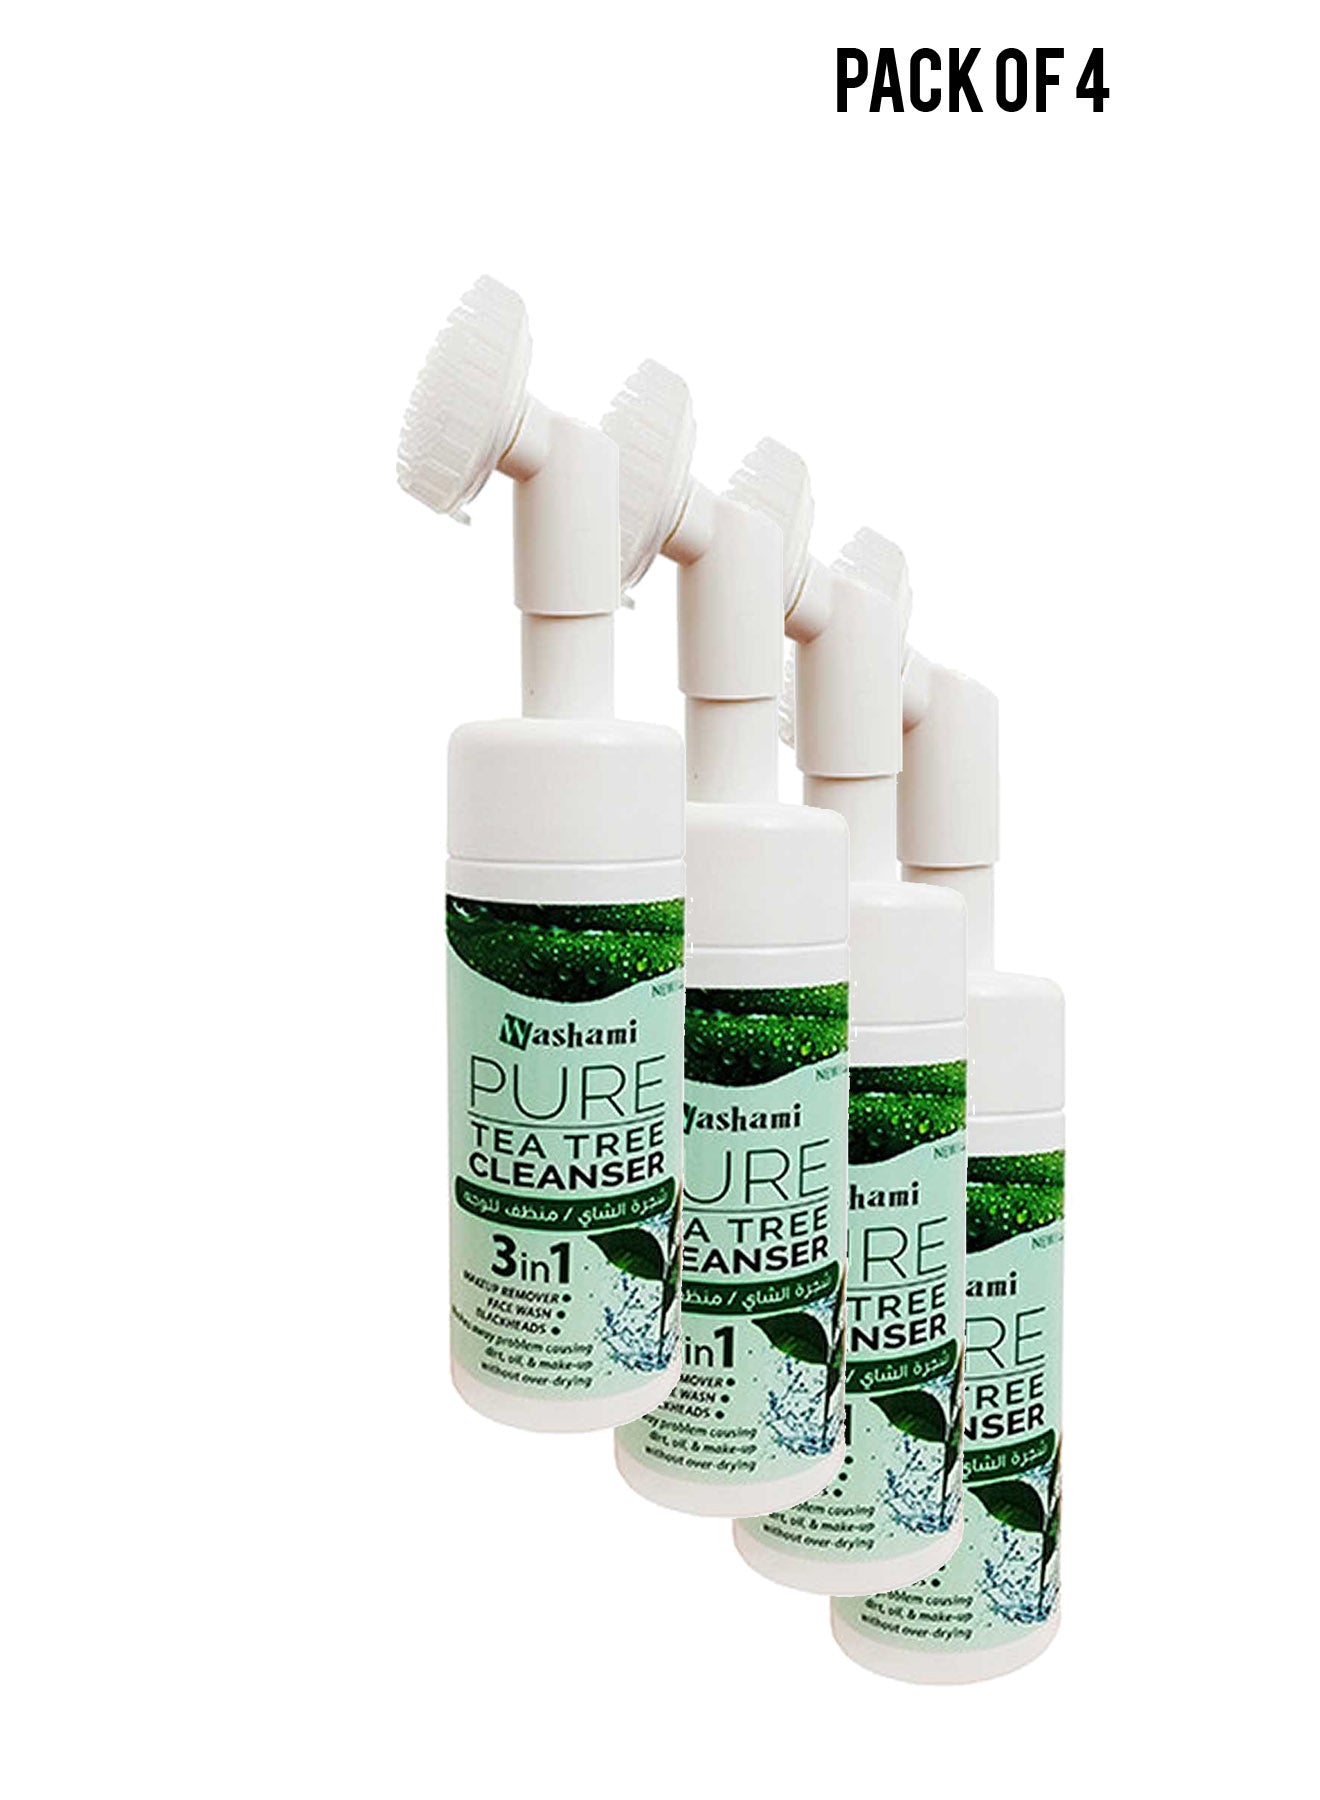 Washami Pure Tea Tree Cleanser 3 in 1 Value Pack of 4 